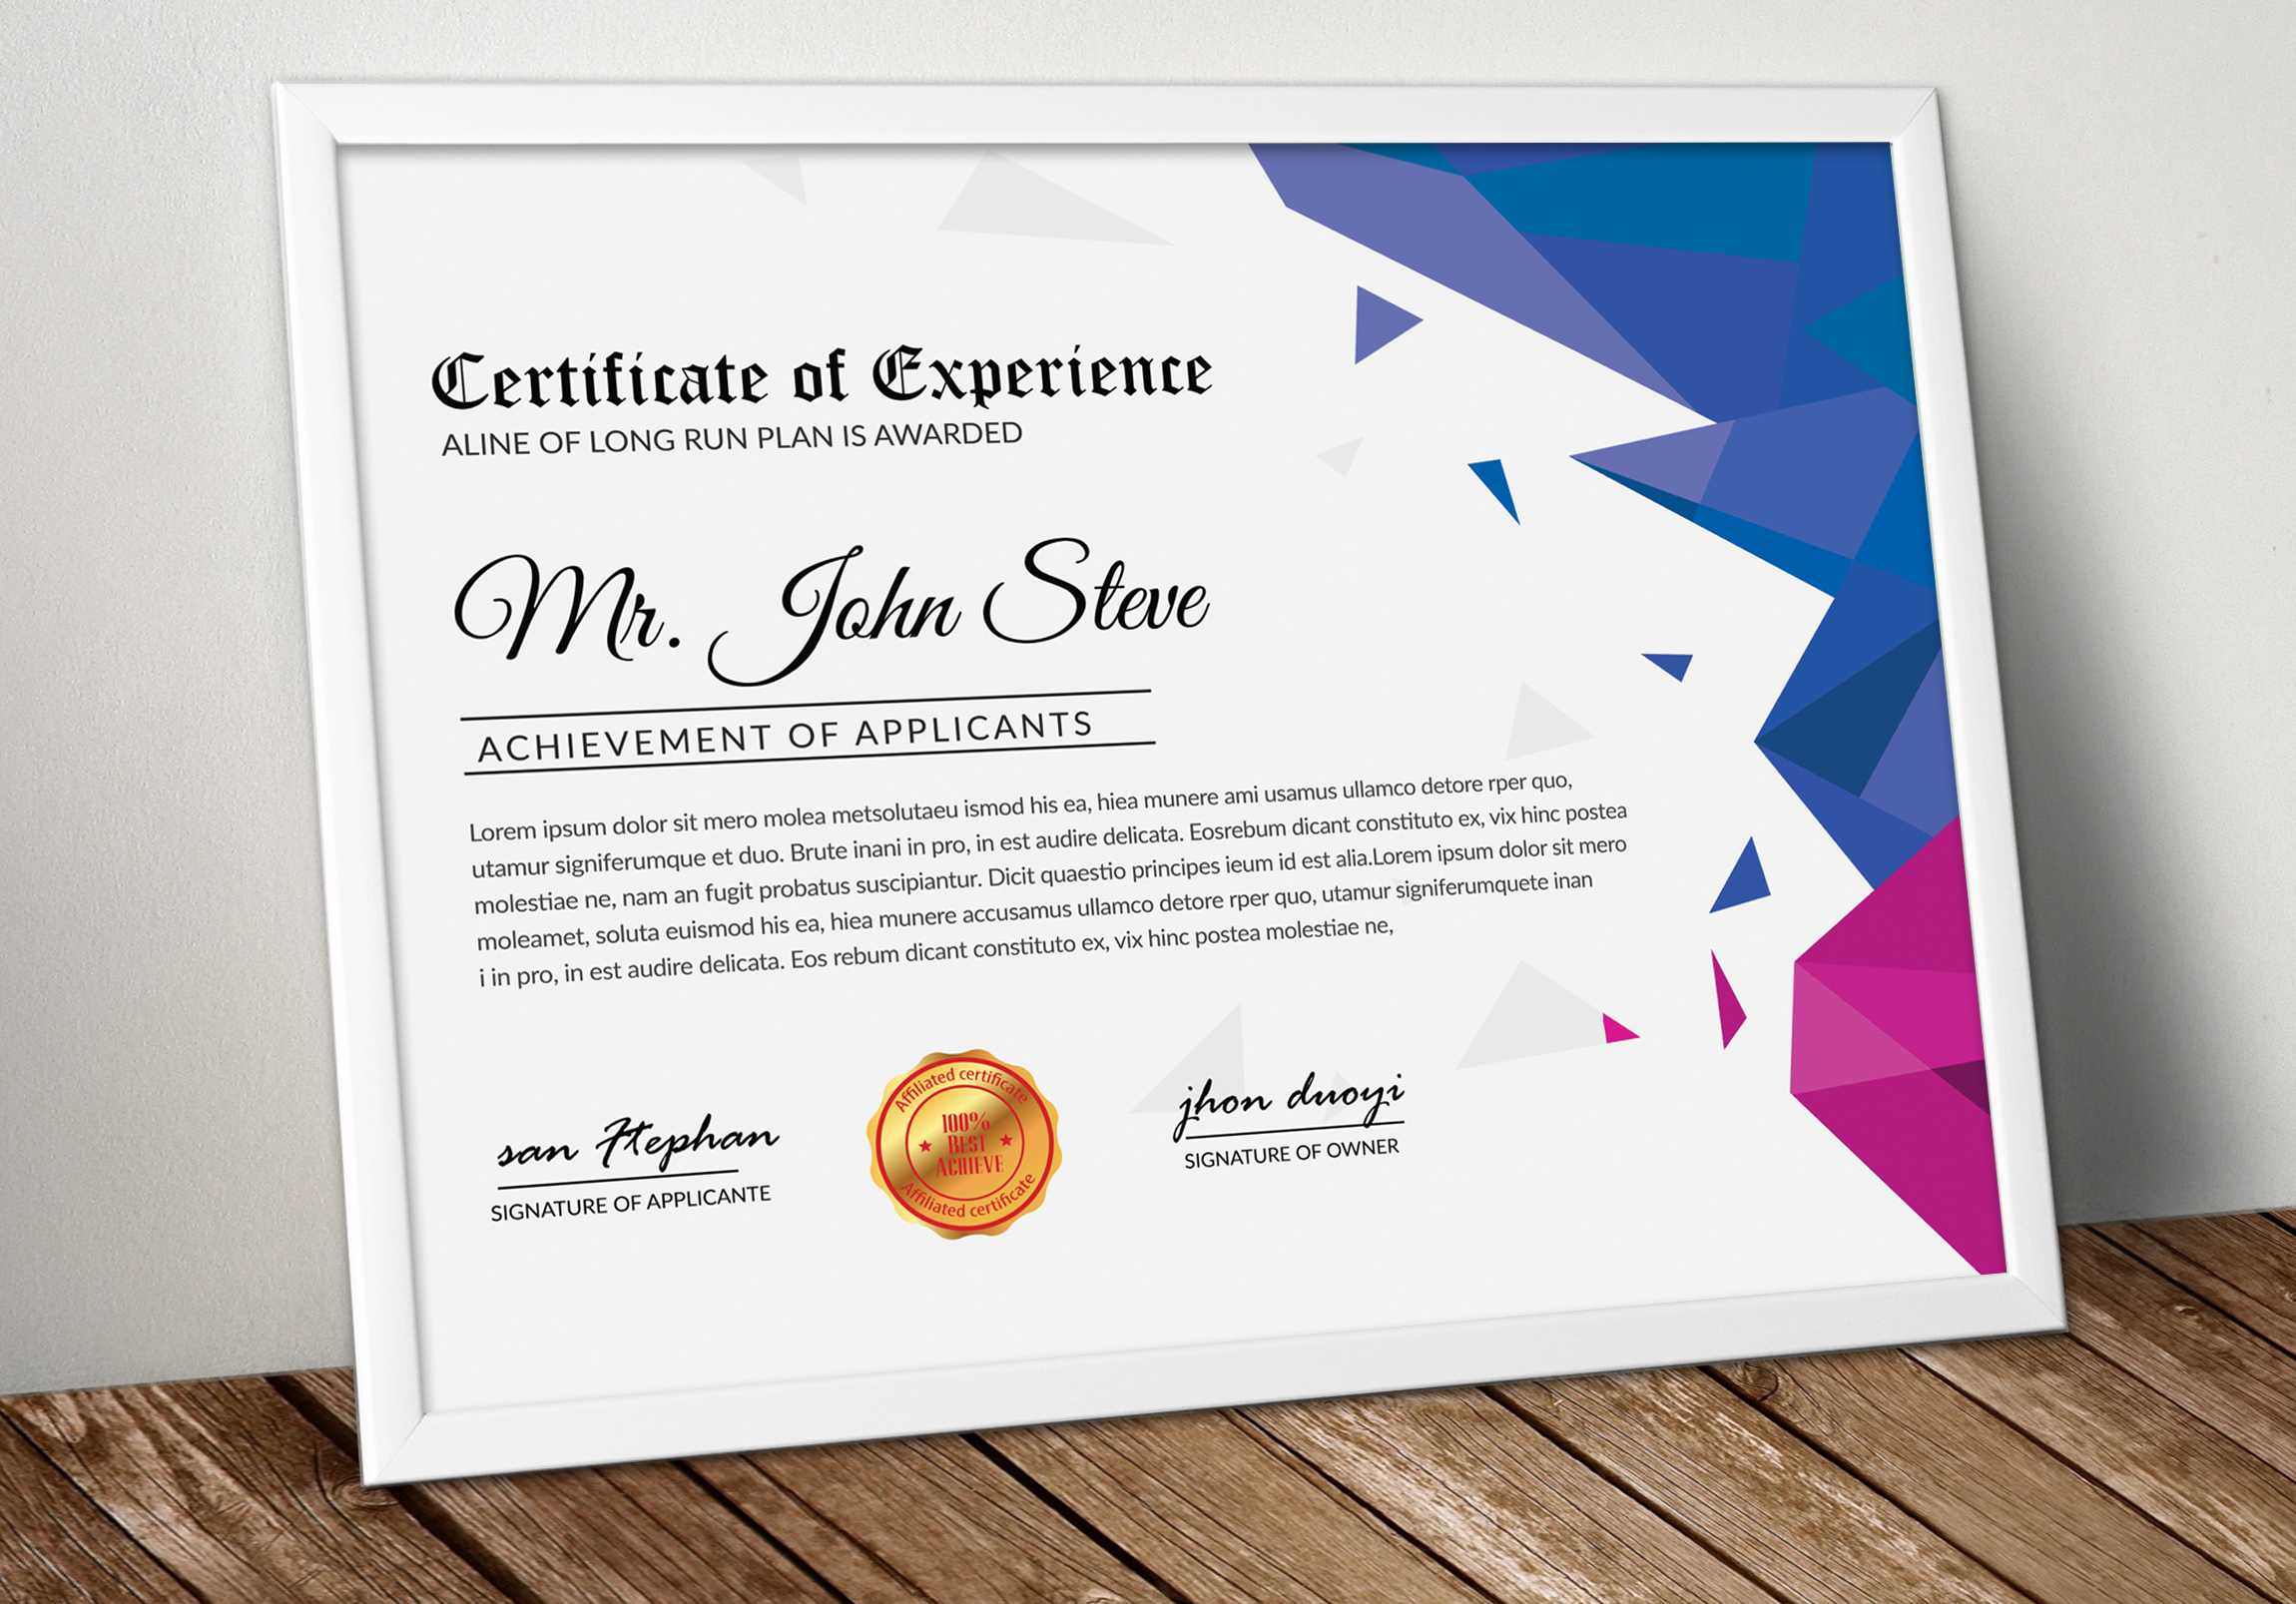 Microsoft Word Certificate Template – Vsual Throughout Professional Certificate Templates For Word